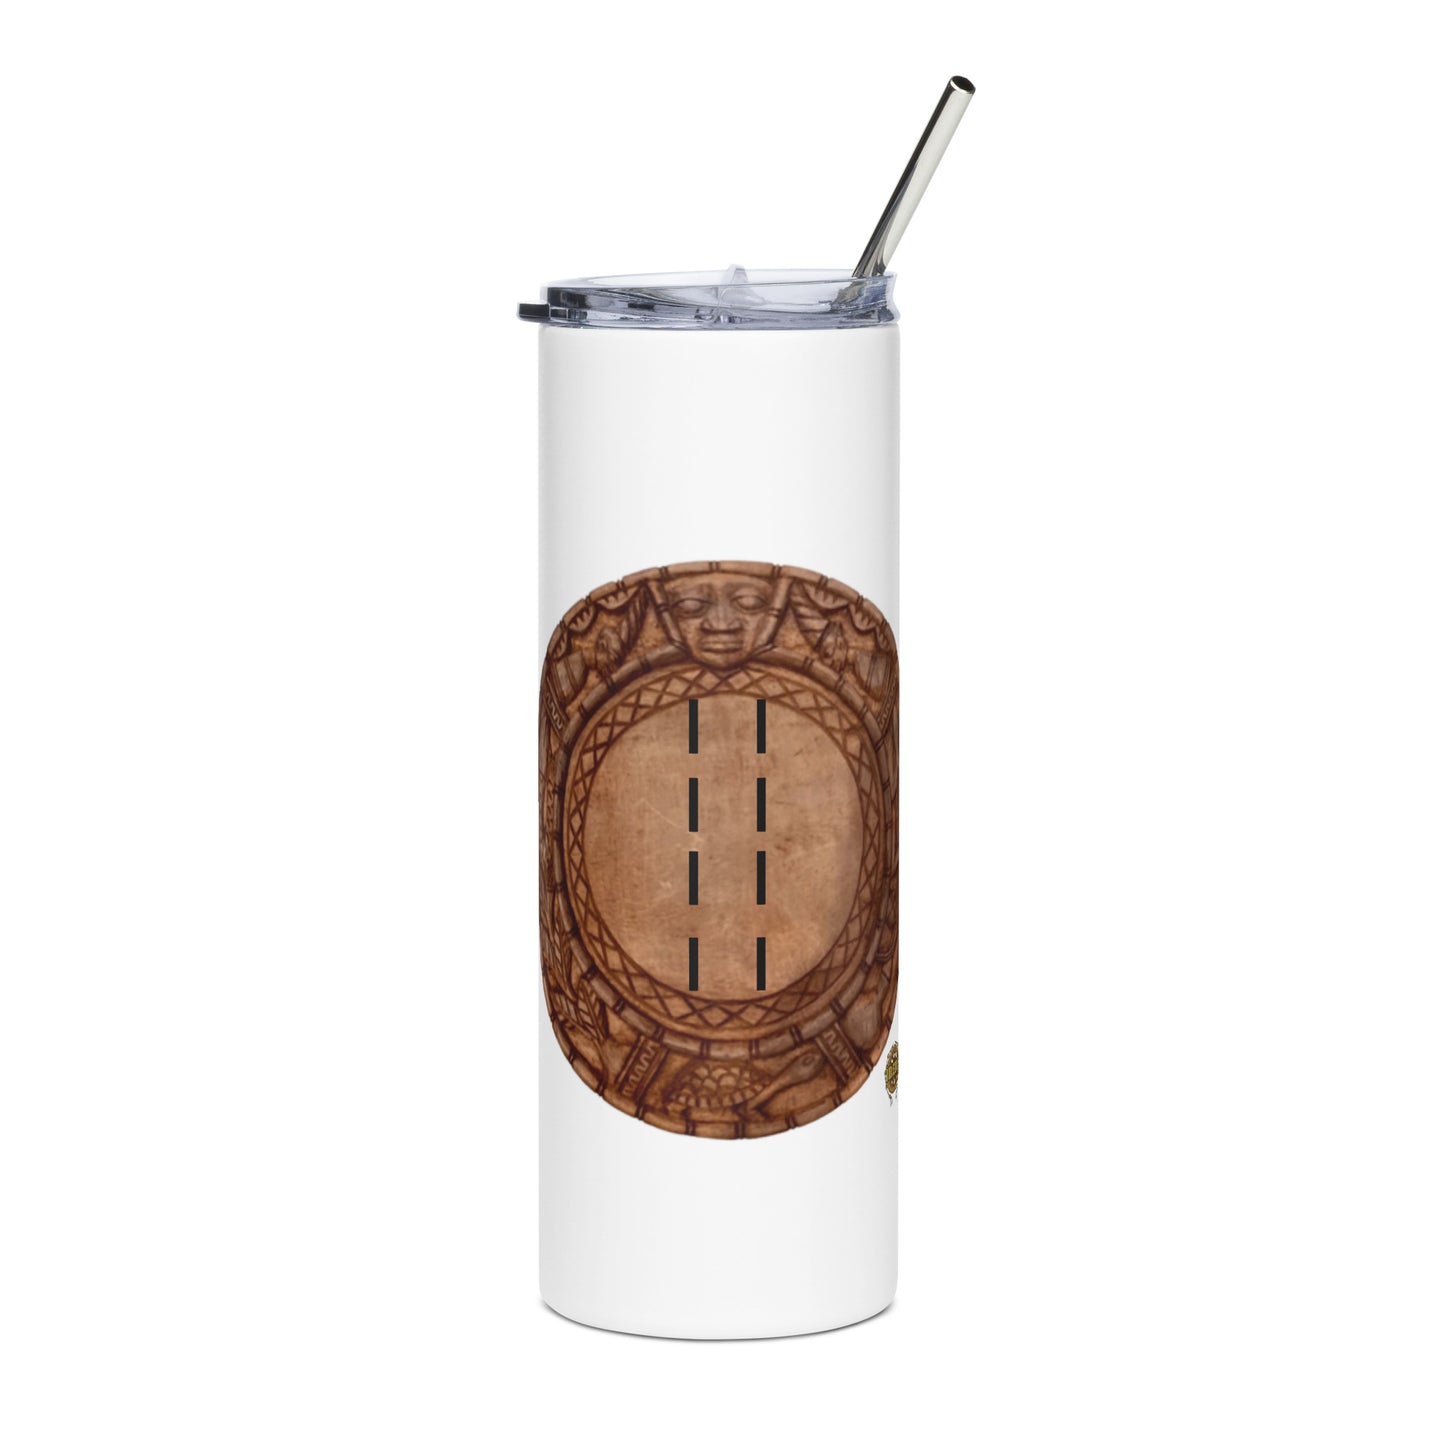 Opon IFA (with Odu) Stainless Steel Tumbler